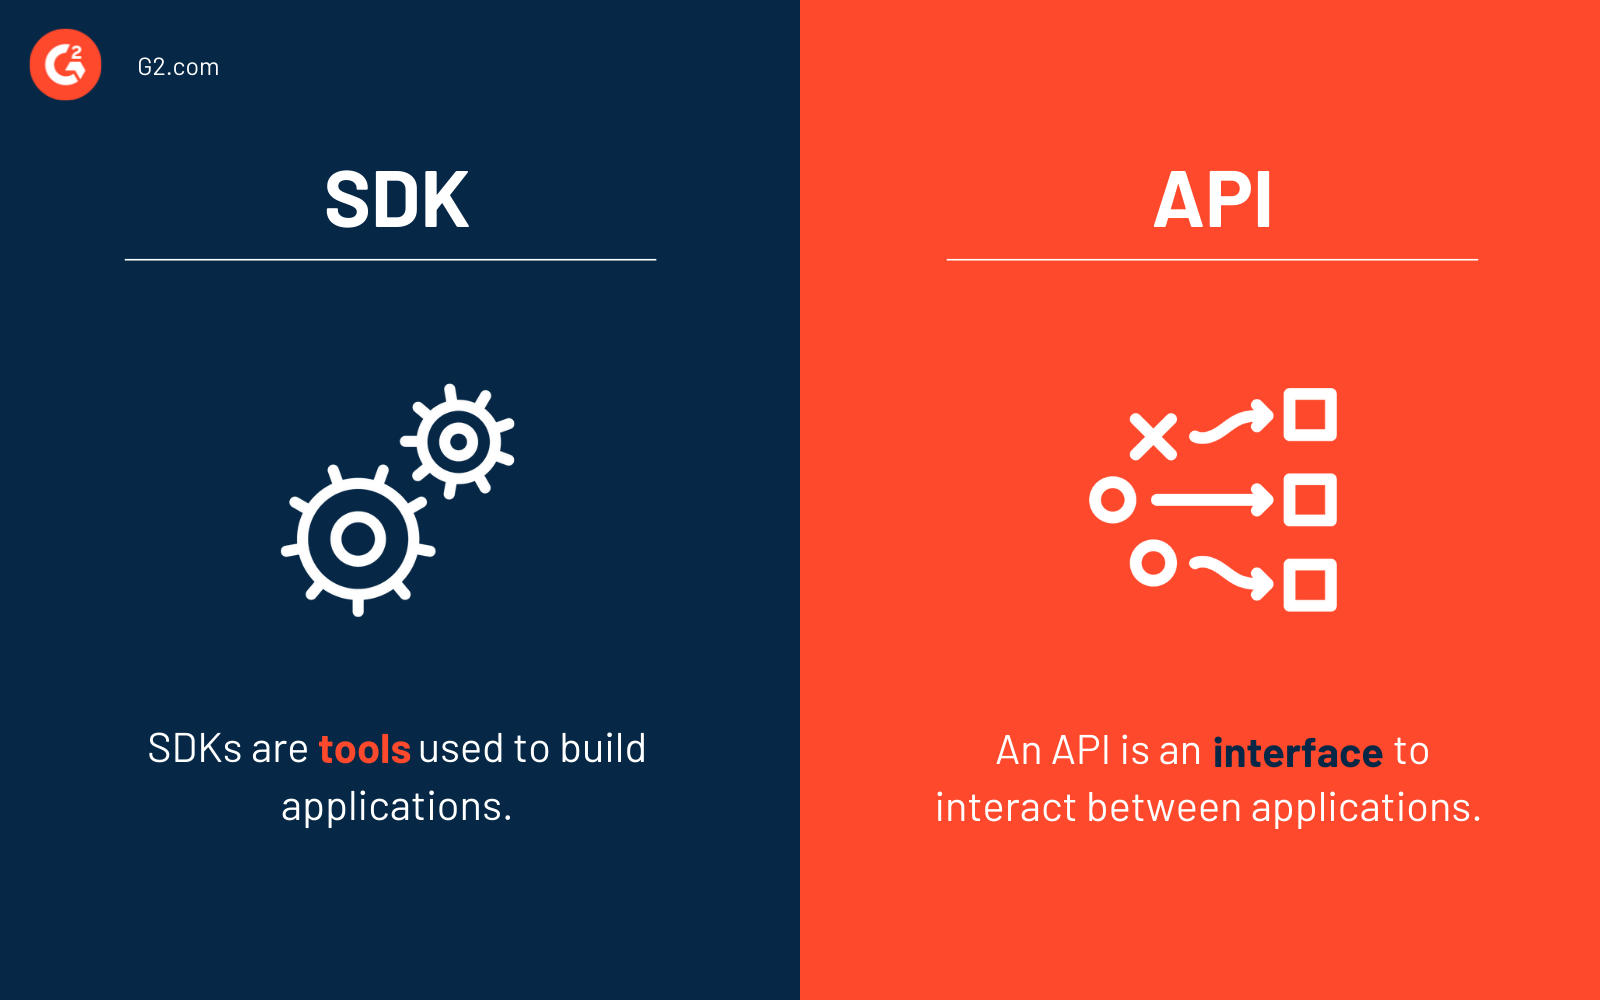 Is it difficult to create an API?